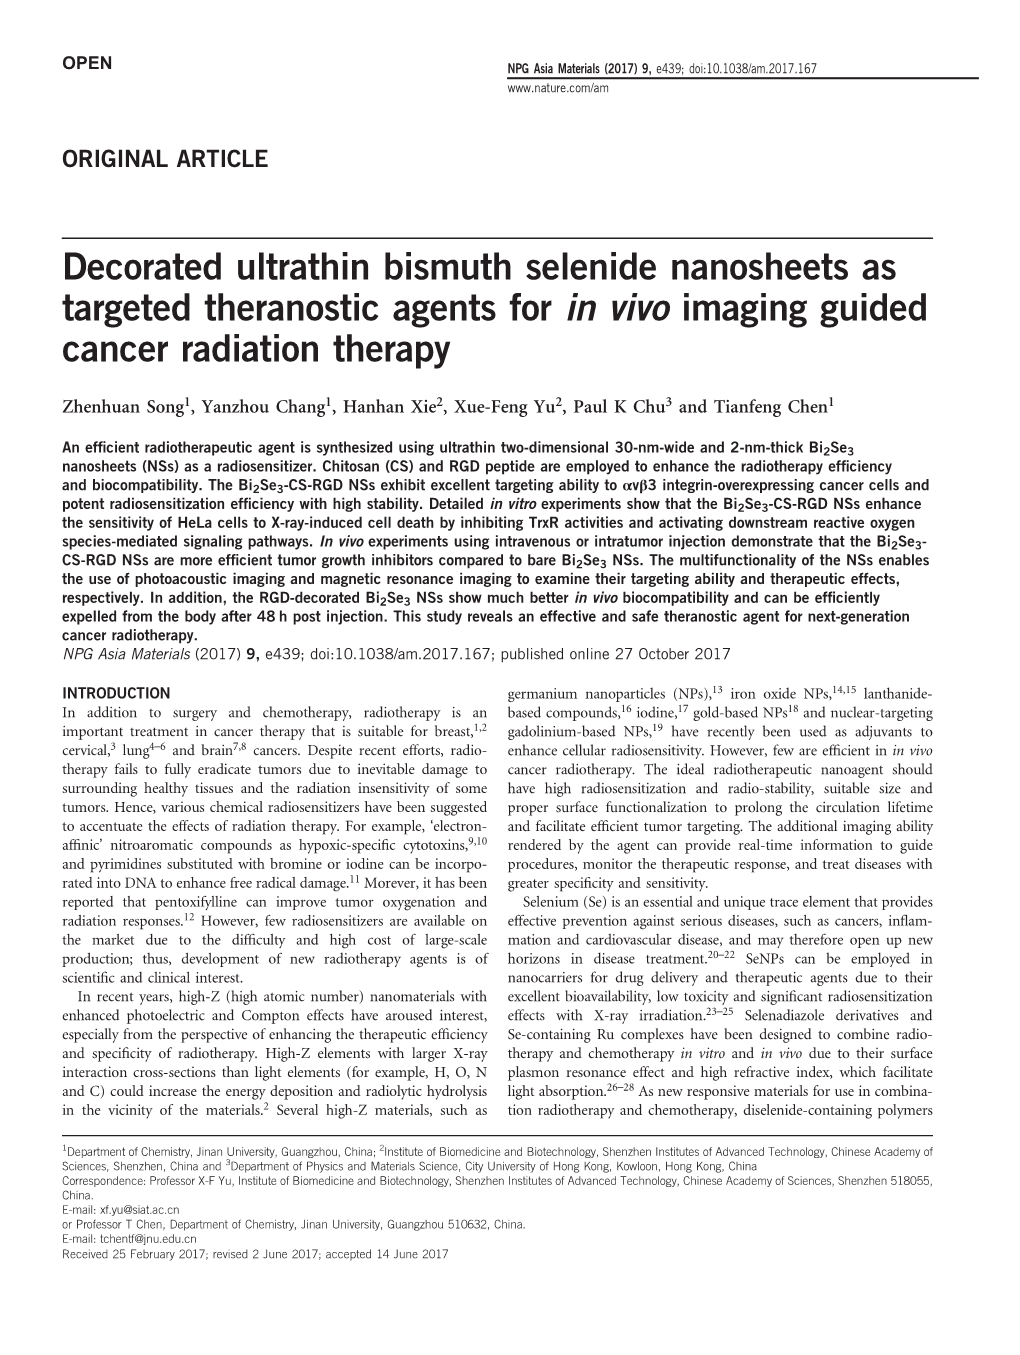 Decorated Ultrathin Bismuth Selenide Nanosheets As Targeted Theranostic Agents for in Vivo Imaging Guided Cancer Radiation Therapy